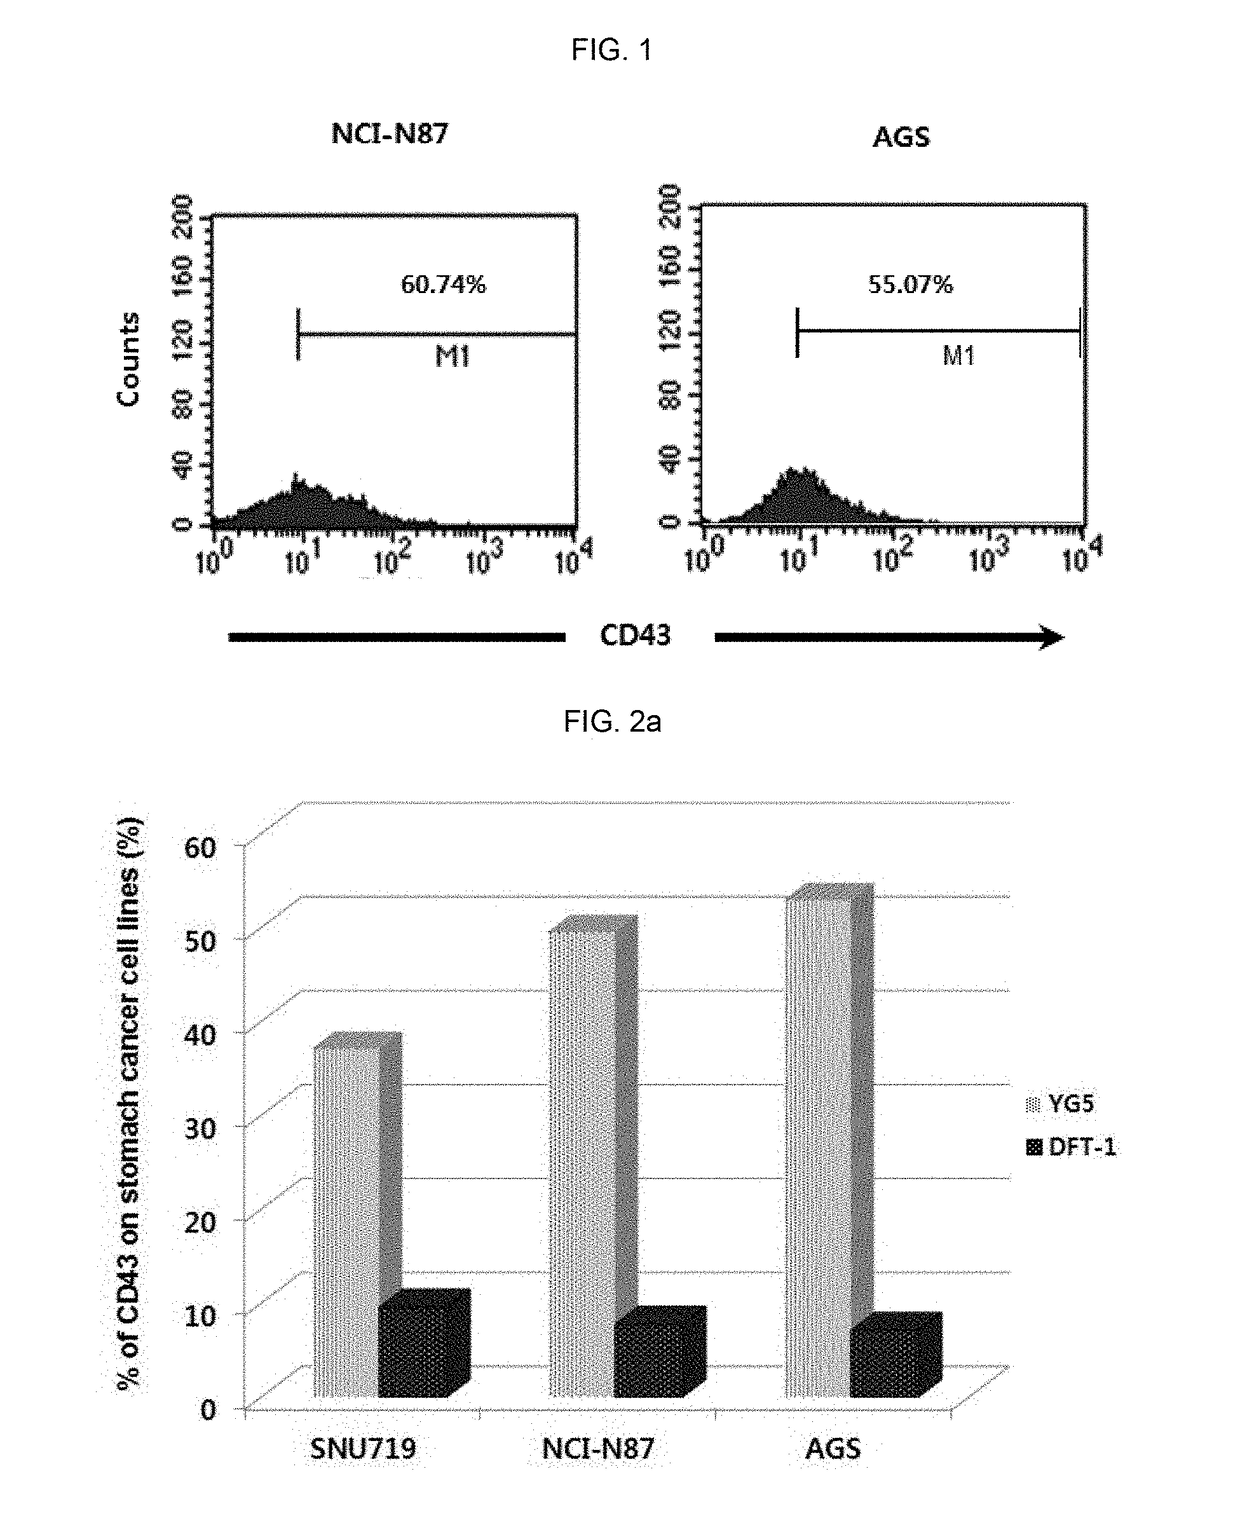 Anti-cd43 antibody and use thereof for cancer treatment